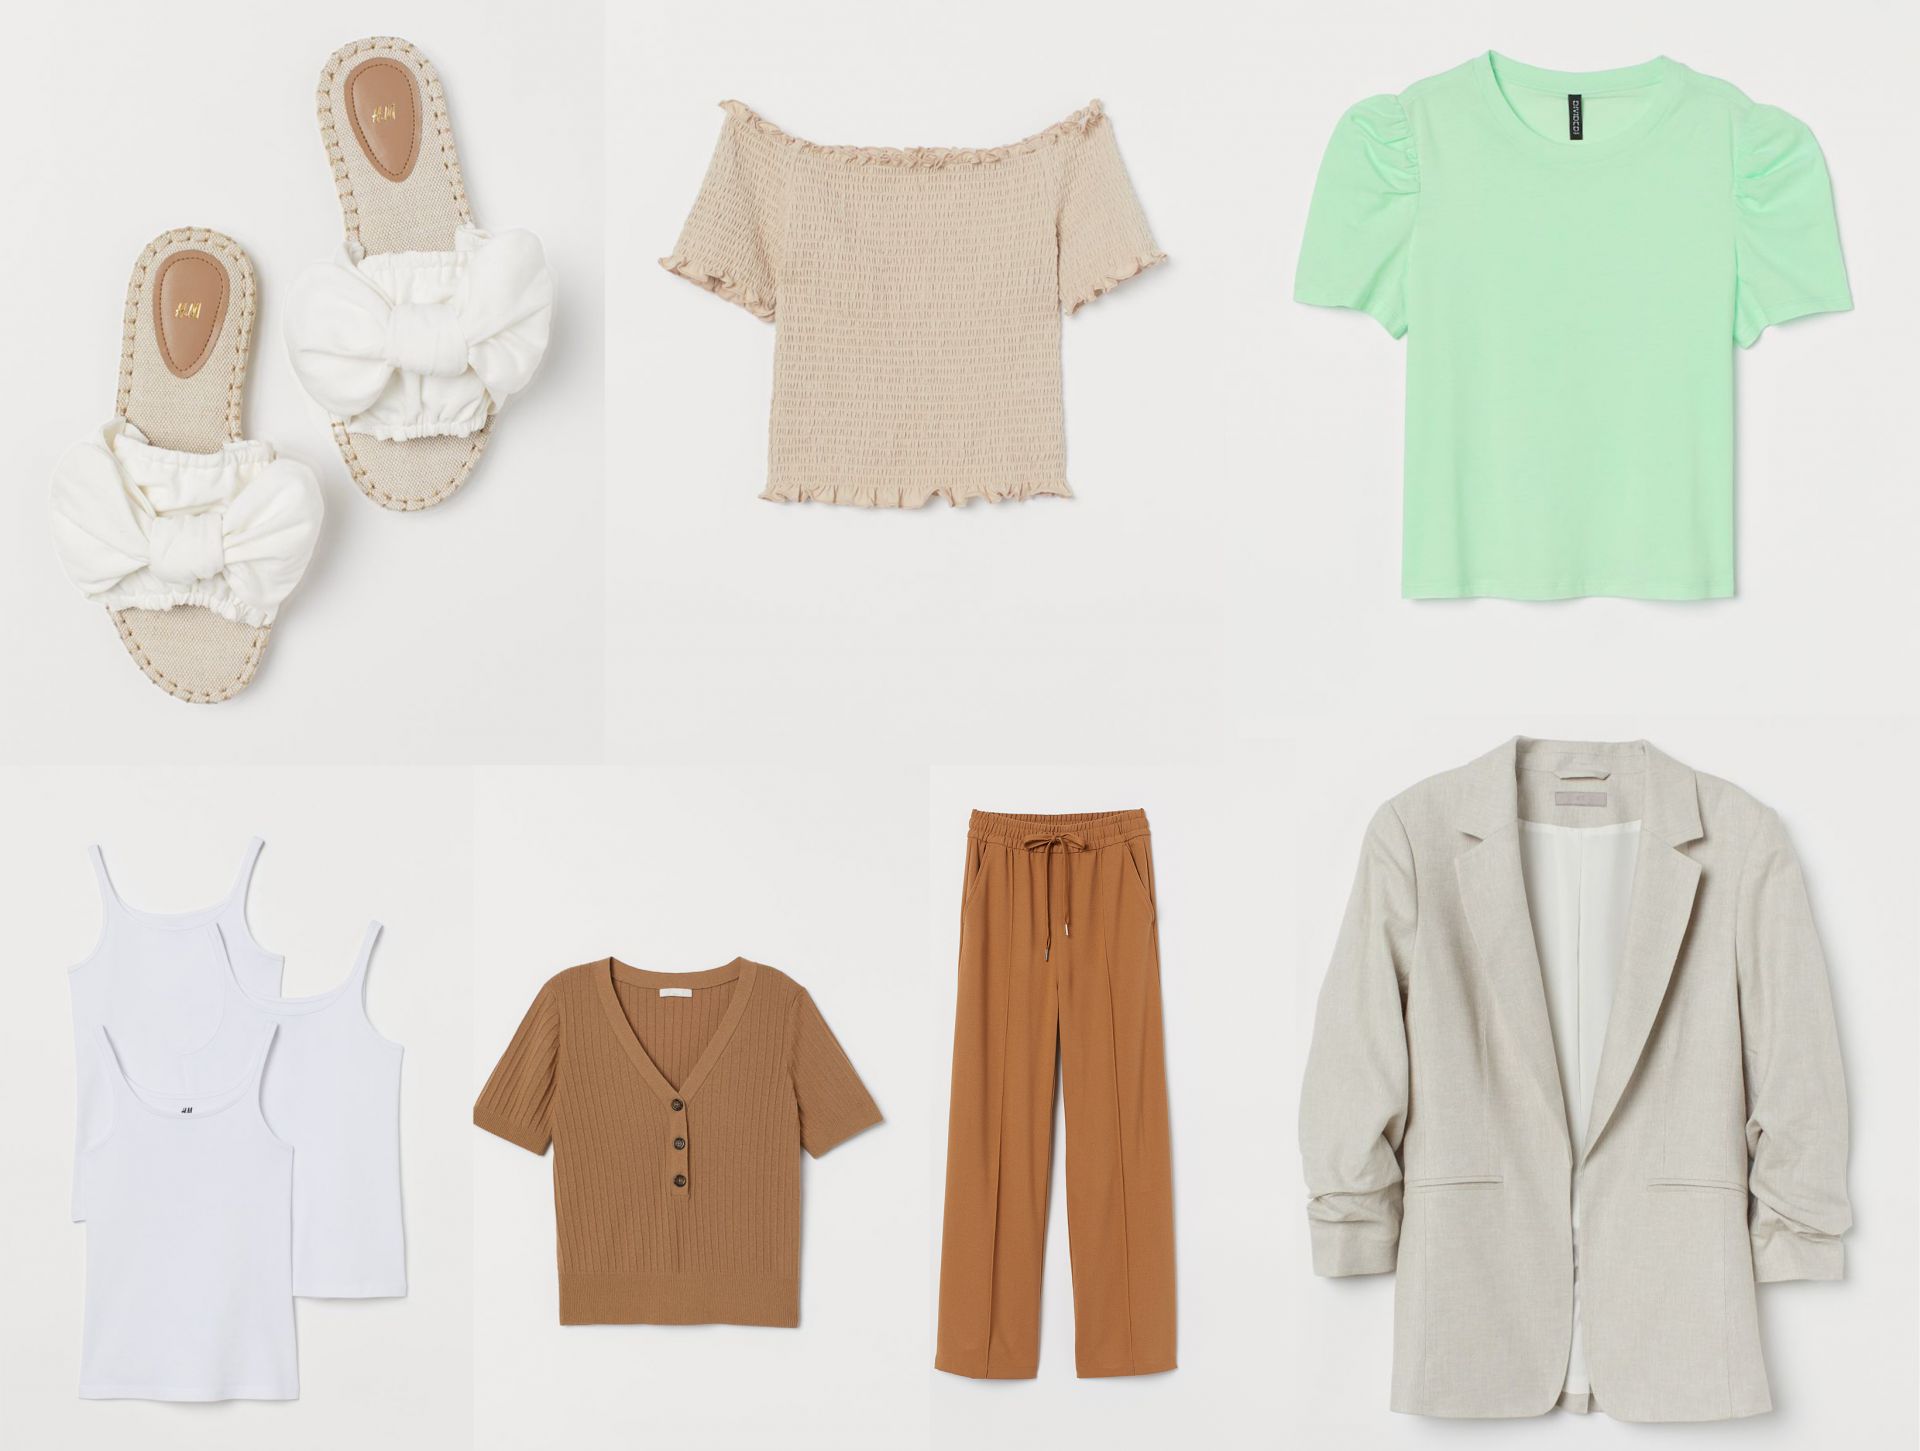 H&M TRY ON Haul 2020 Spring-Summer Basics - Pop in! It's Cristina